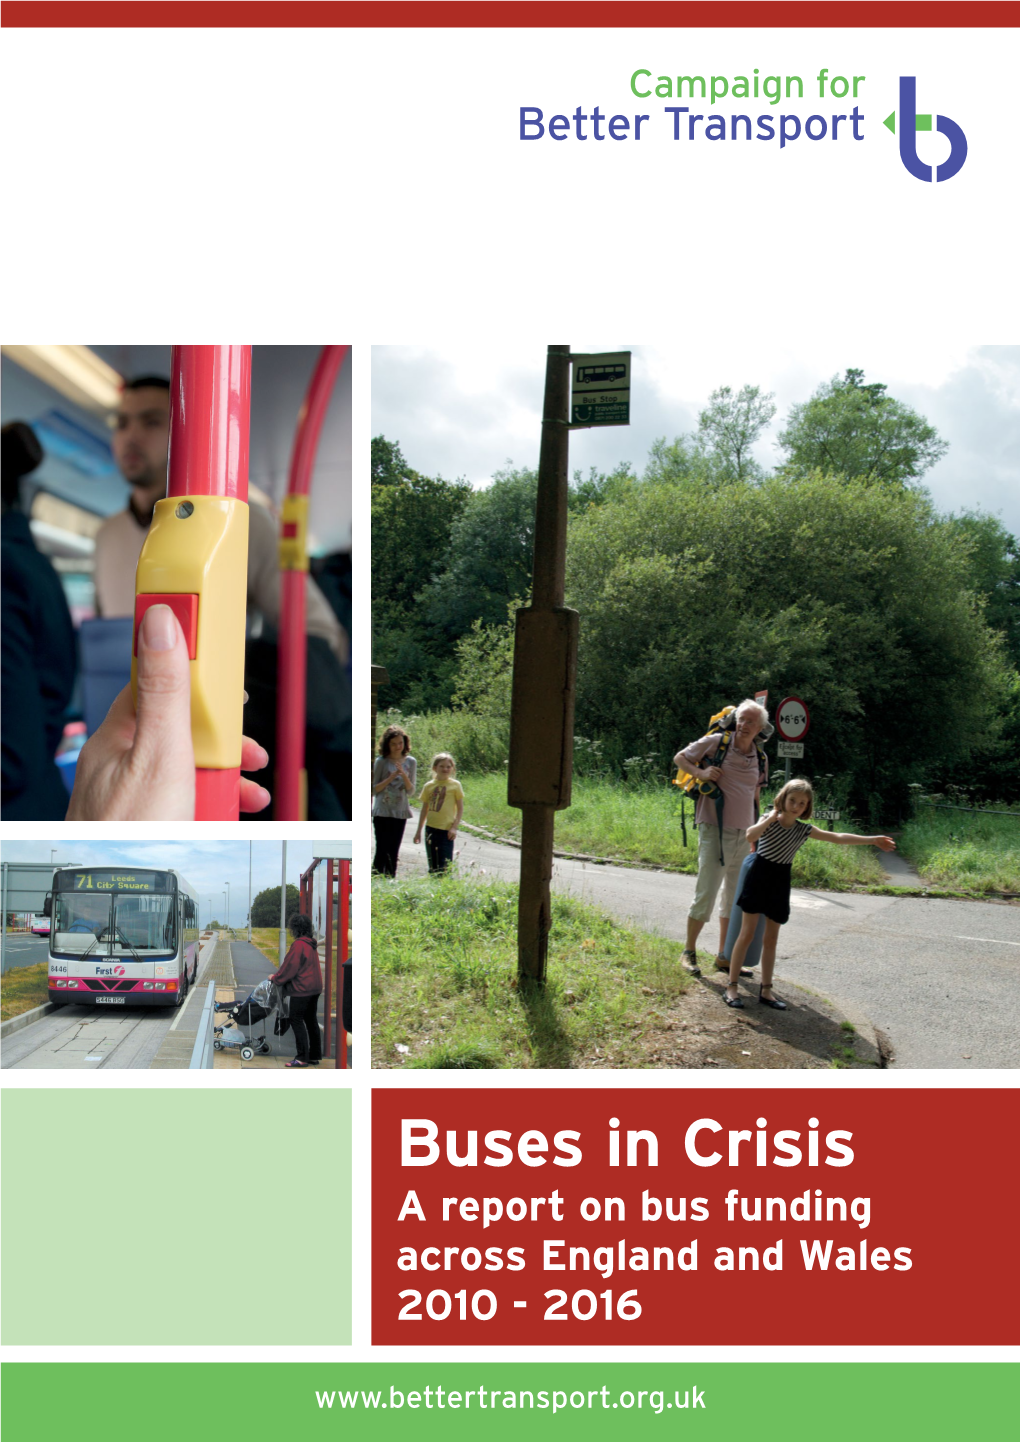 Buses in Crisis a Report on Bus Funding Across England and Wales 2010 - 2016 Contents 1